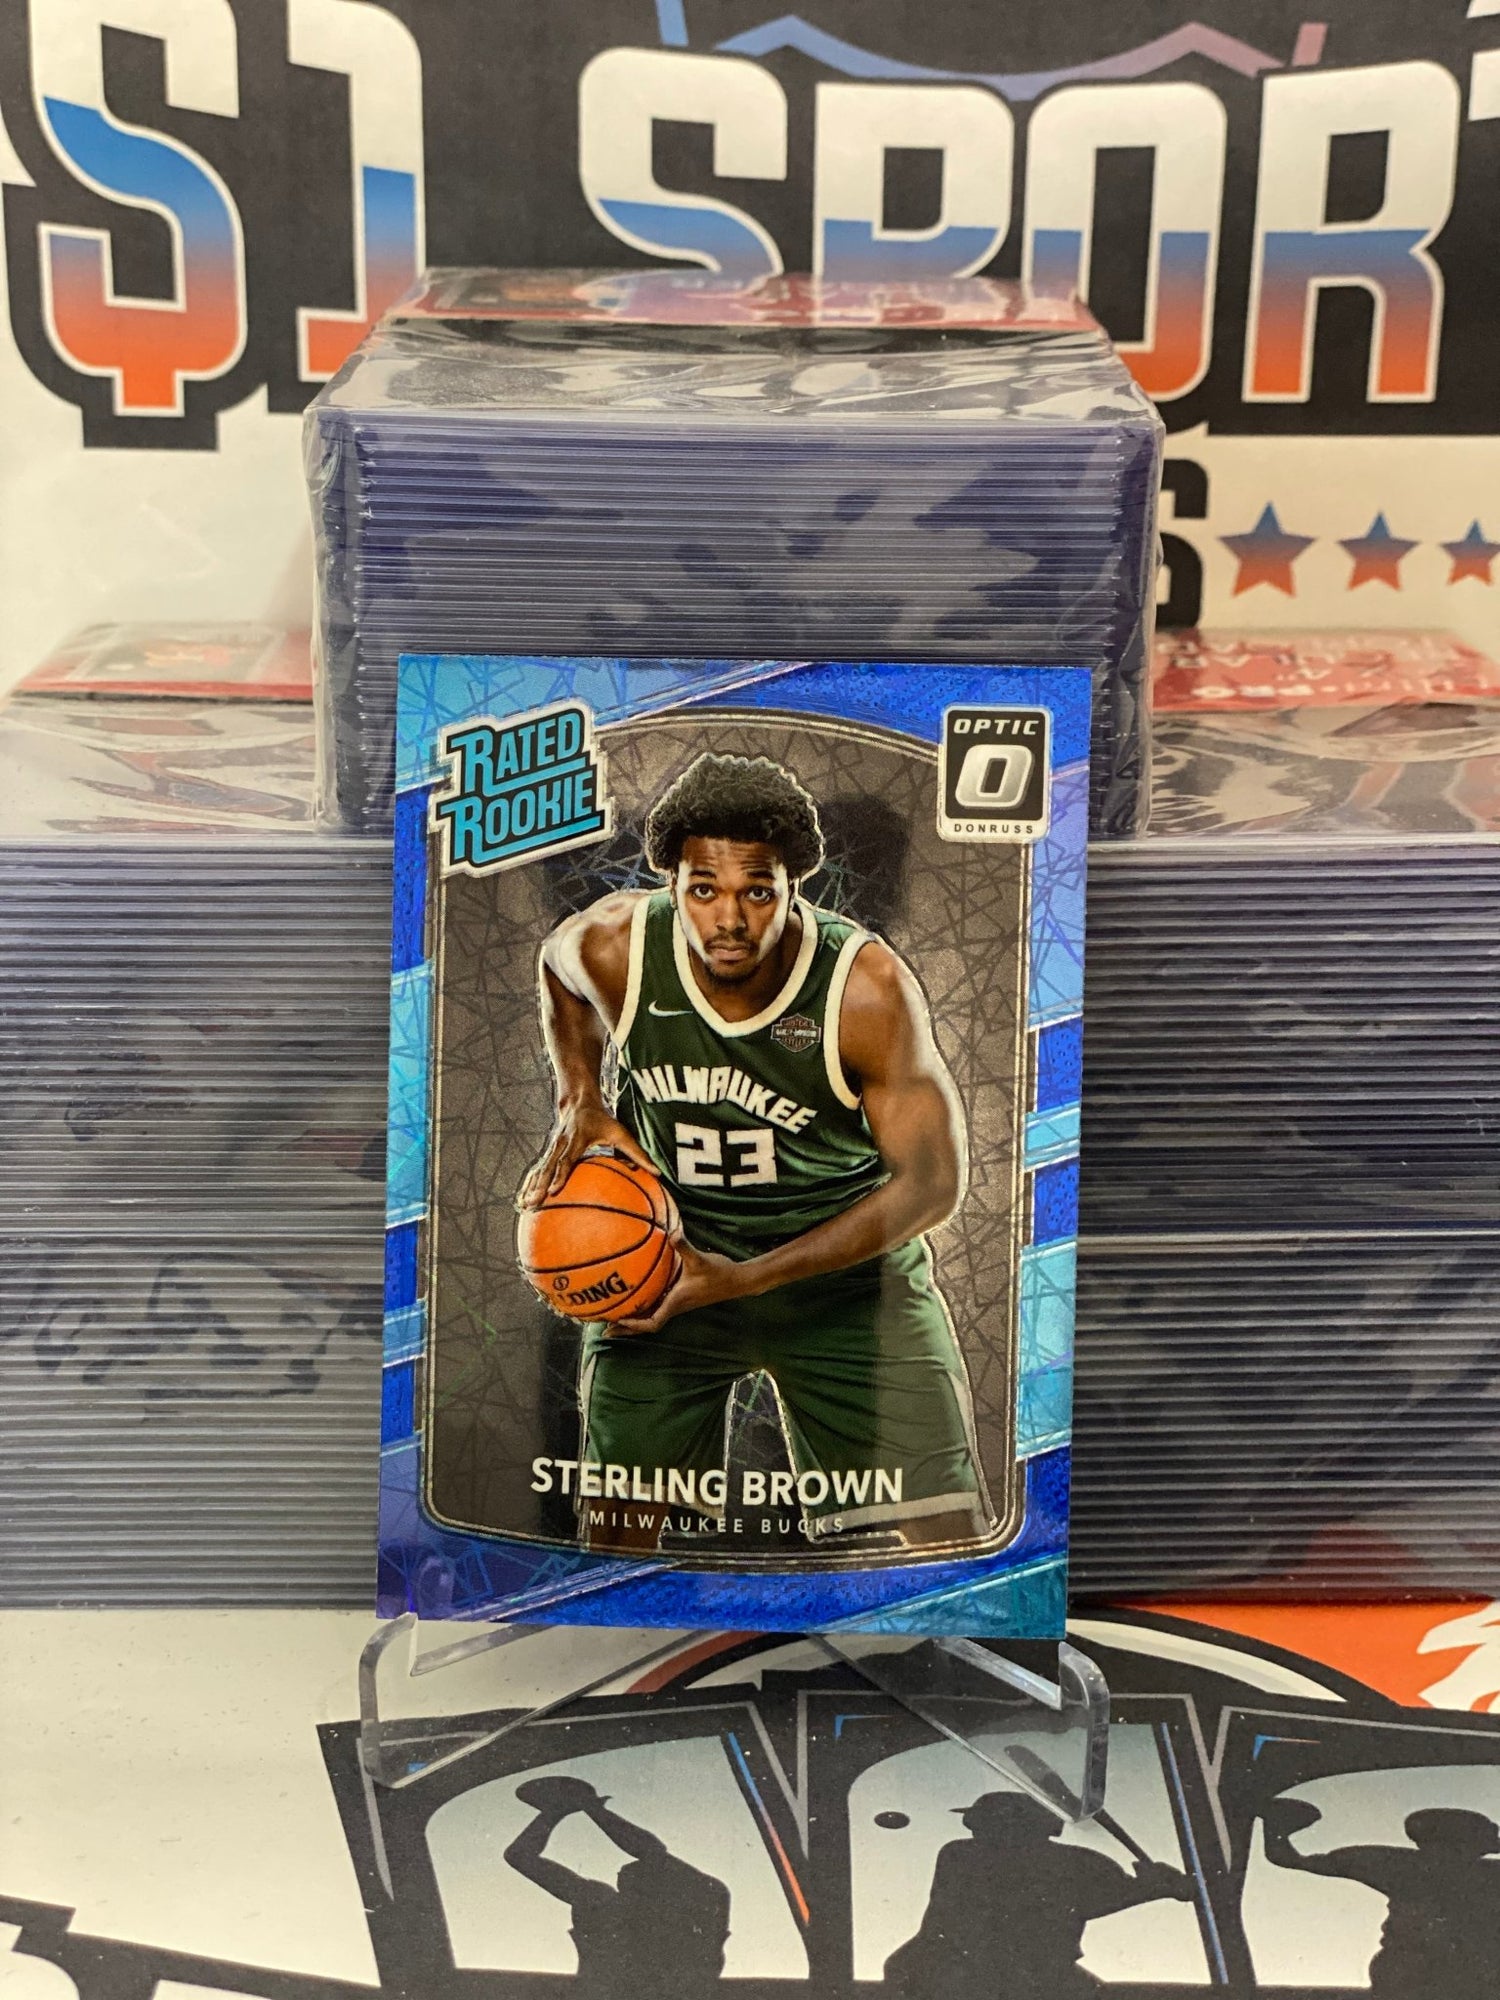 2017 Donruss Optic (Blue Velocity Prizm, Rated Rookie) Sterling Brown #165